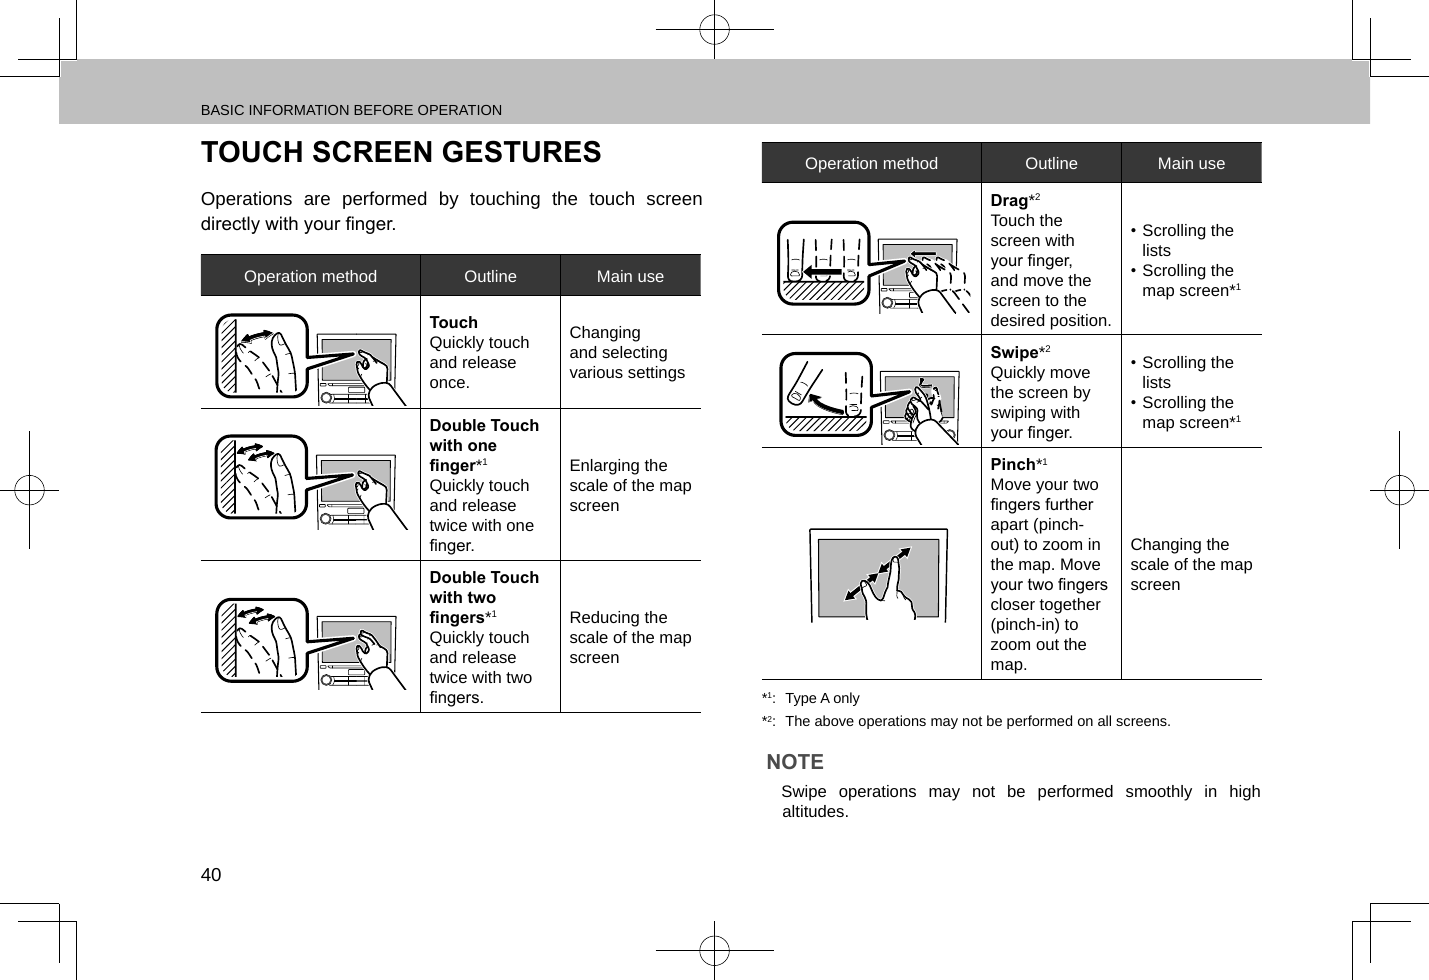 BASIC INFORMATION BEFORE OPERATION40TOUCH SCREEN GESTURESOperations are performed by touching the touch screen directly with your nger.Operation method Outline Main useTouchQuickly touch and release once.Changing and selecting various settingsDouble Touch with one nger*1Quickly touch and release twice with one nger.Enlarging the scale of the map screenDouble Touch with two ngers*1Quickly touch and release twice with two ngers.Reducing the scale of the map screenOperation method Outline Main useDrag*2Touch the screen with your nger, and move the screen to the desired position.• Scrolling the lists• Scrolling the map screen*1Swipe*2Quickly move the screen by swiping with your nger.• Scrolling the lists• Scrolling the map screen*1Pinch*1Move your two ngers further apart (pinch-out) to zoom in the map. Move your two ngers closer together (pinch-in) to zoom out the map.Changing the scale of the map screen*1:  Type A only*2:  The above operations may not be performed on all screens.NOTE lSwipe operations may not be performed smoothly in high altitudes.